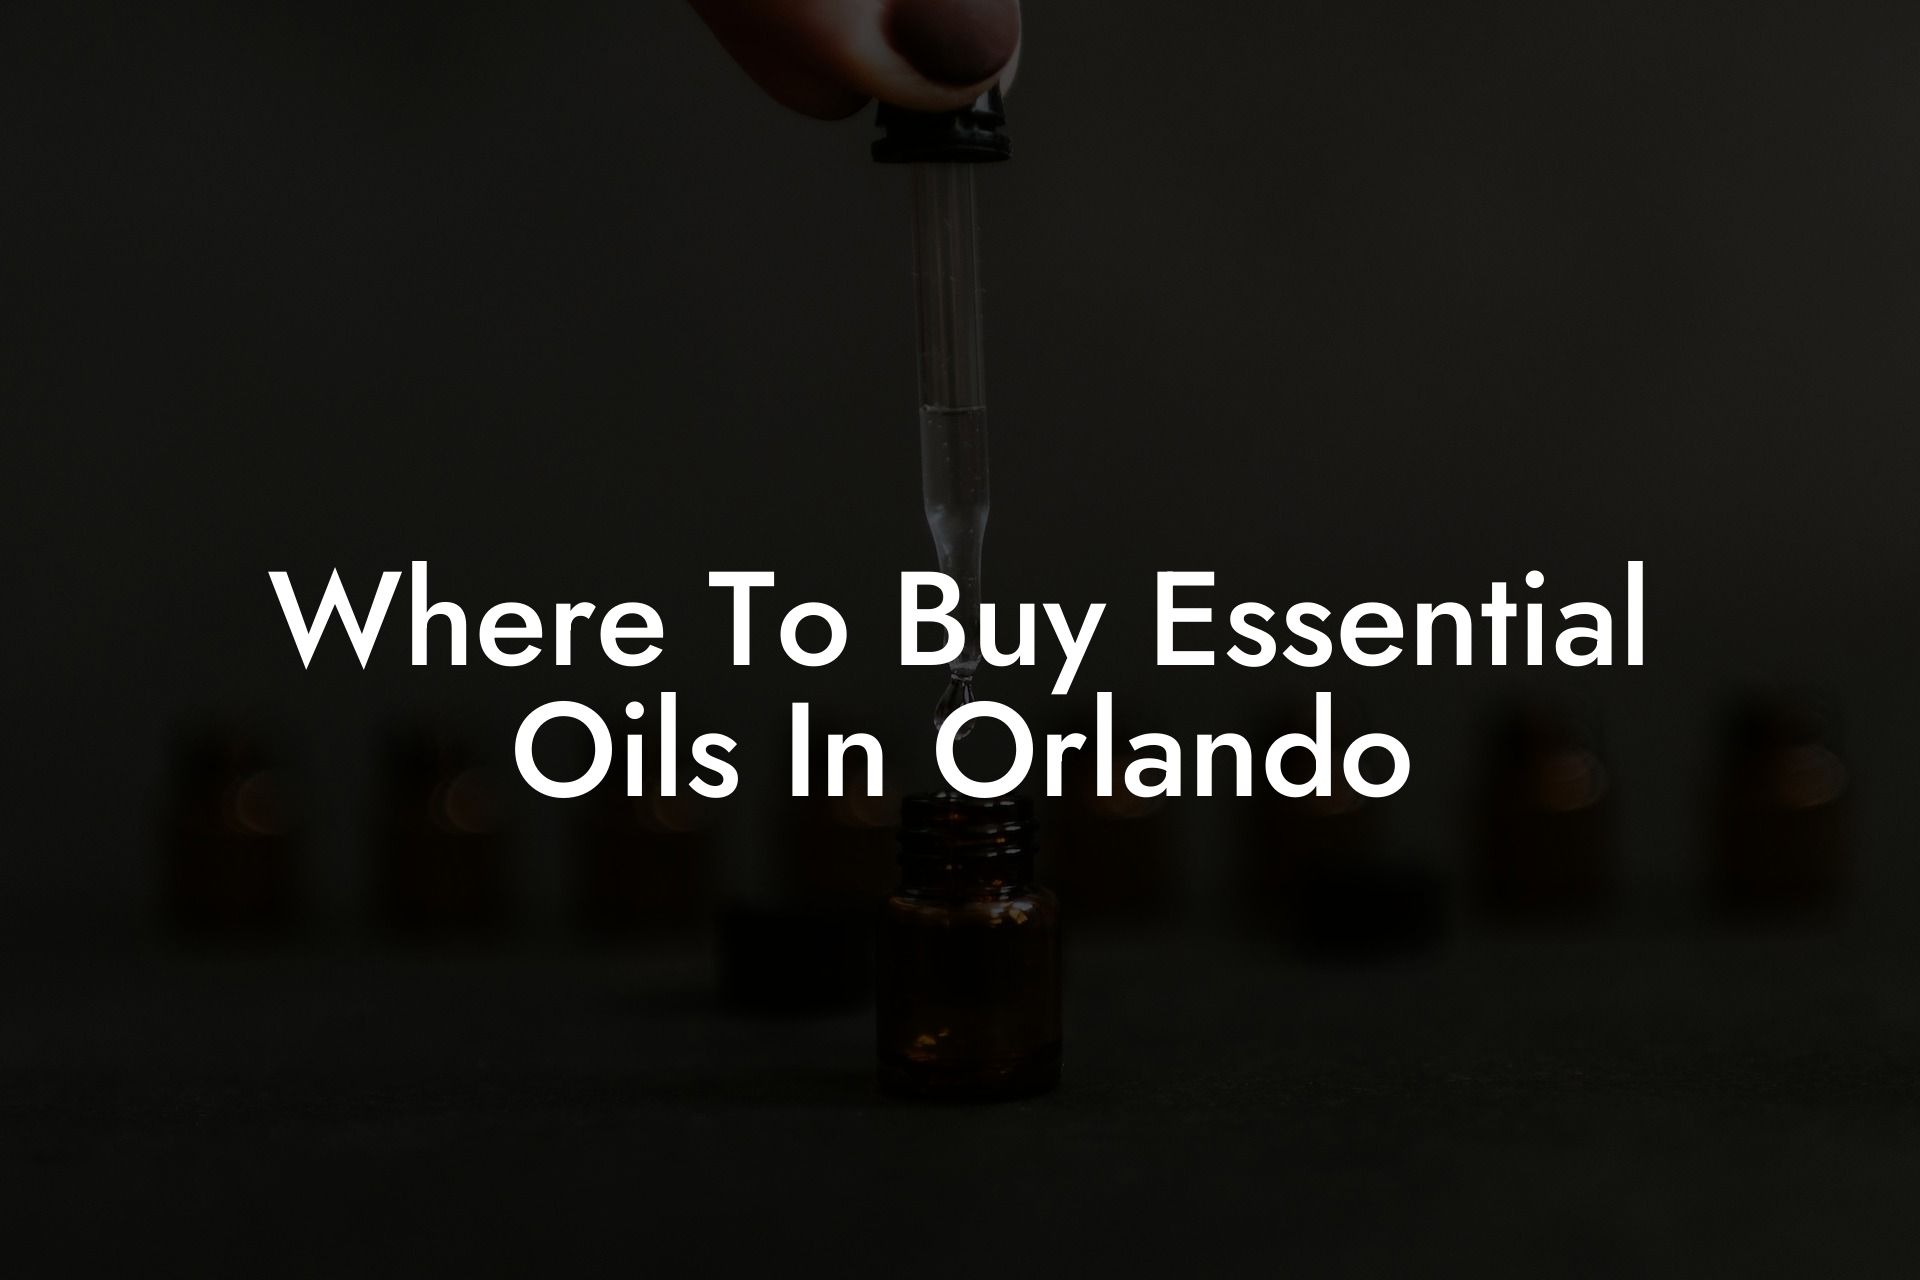 Where To Buy Essential Oils In Orlando